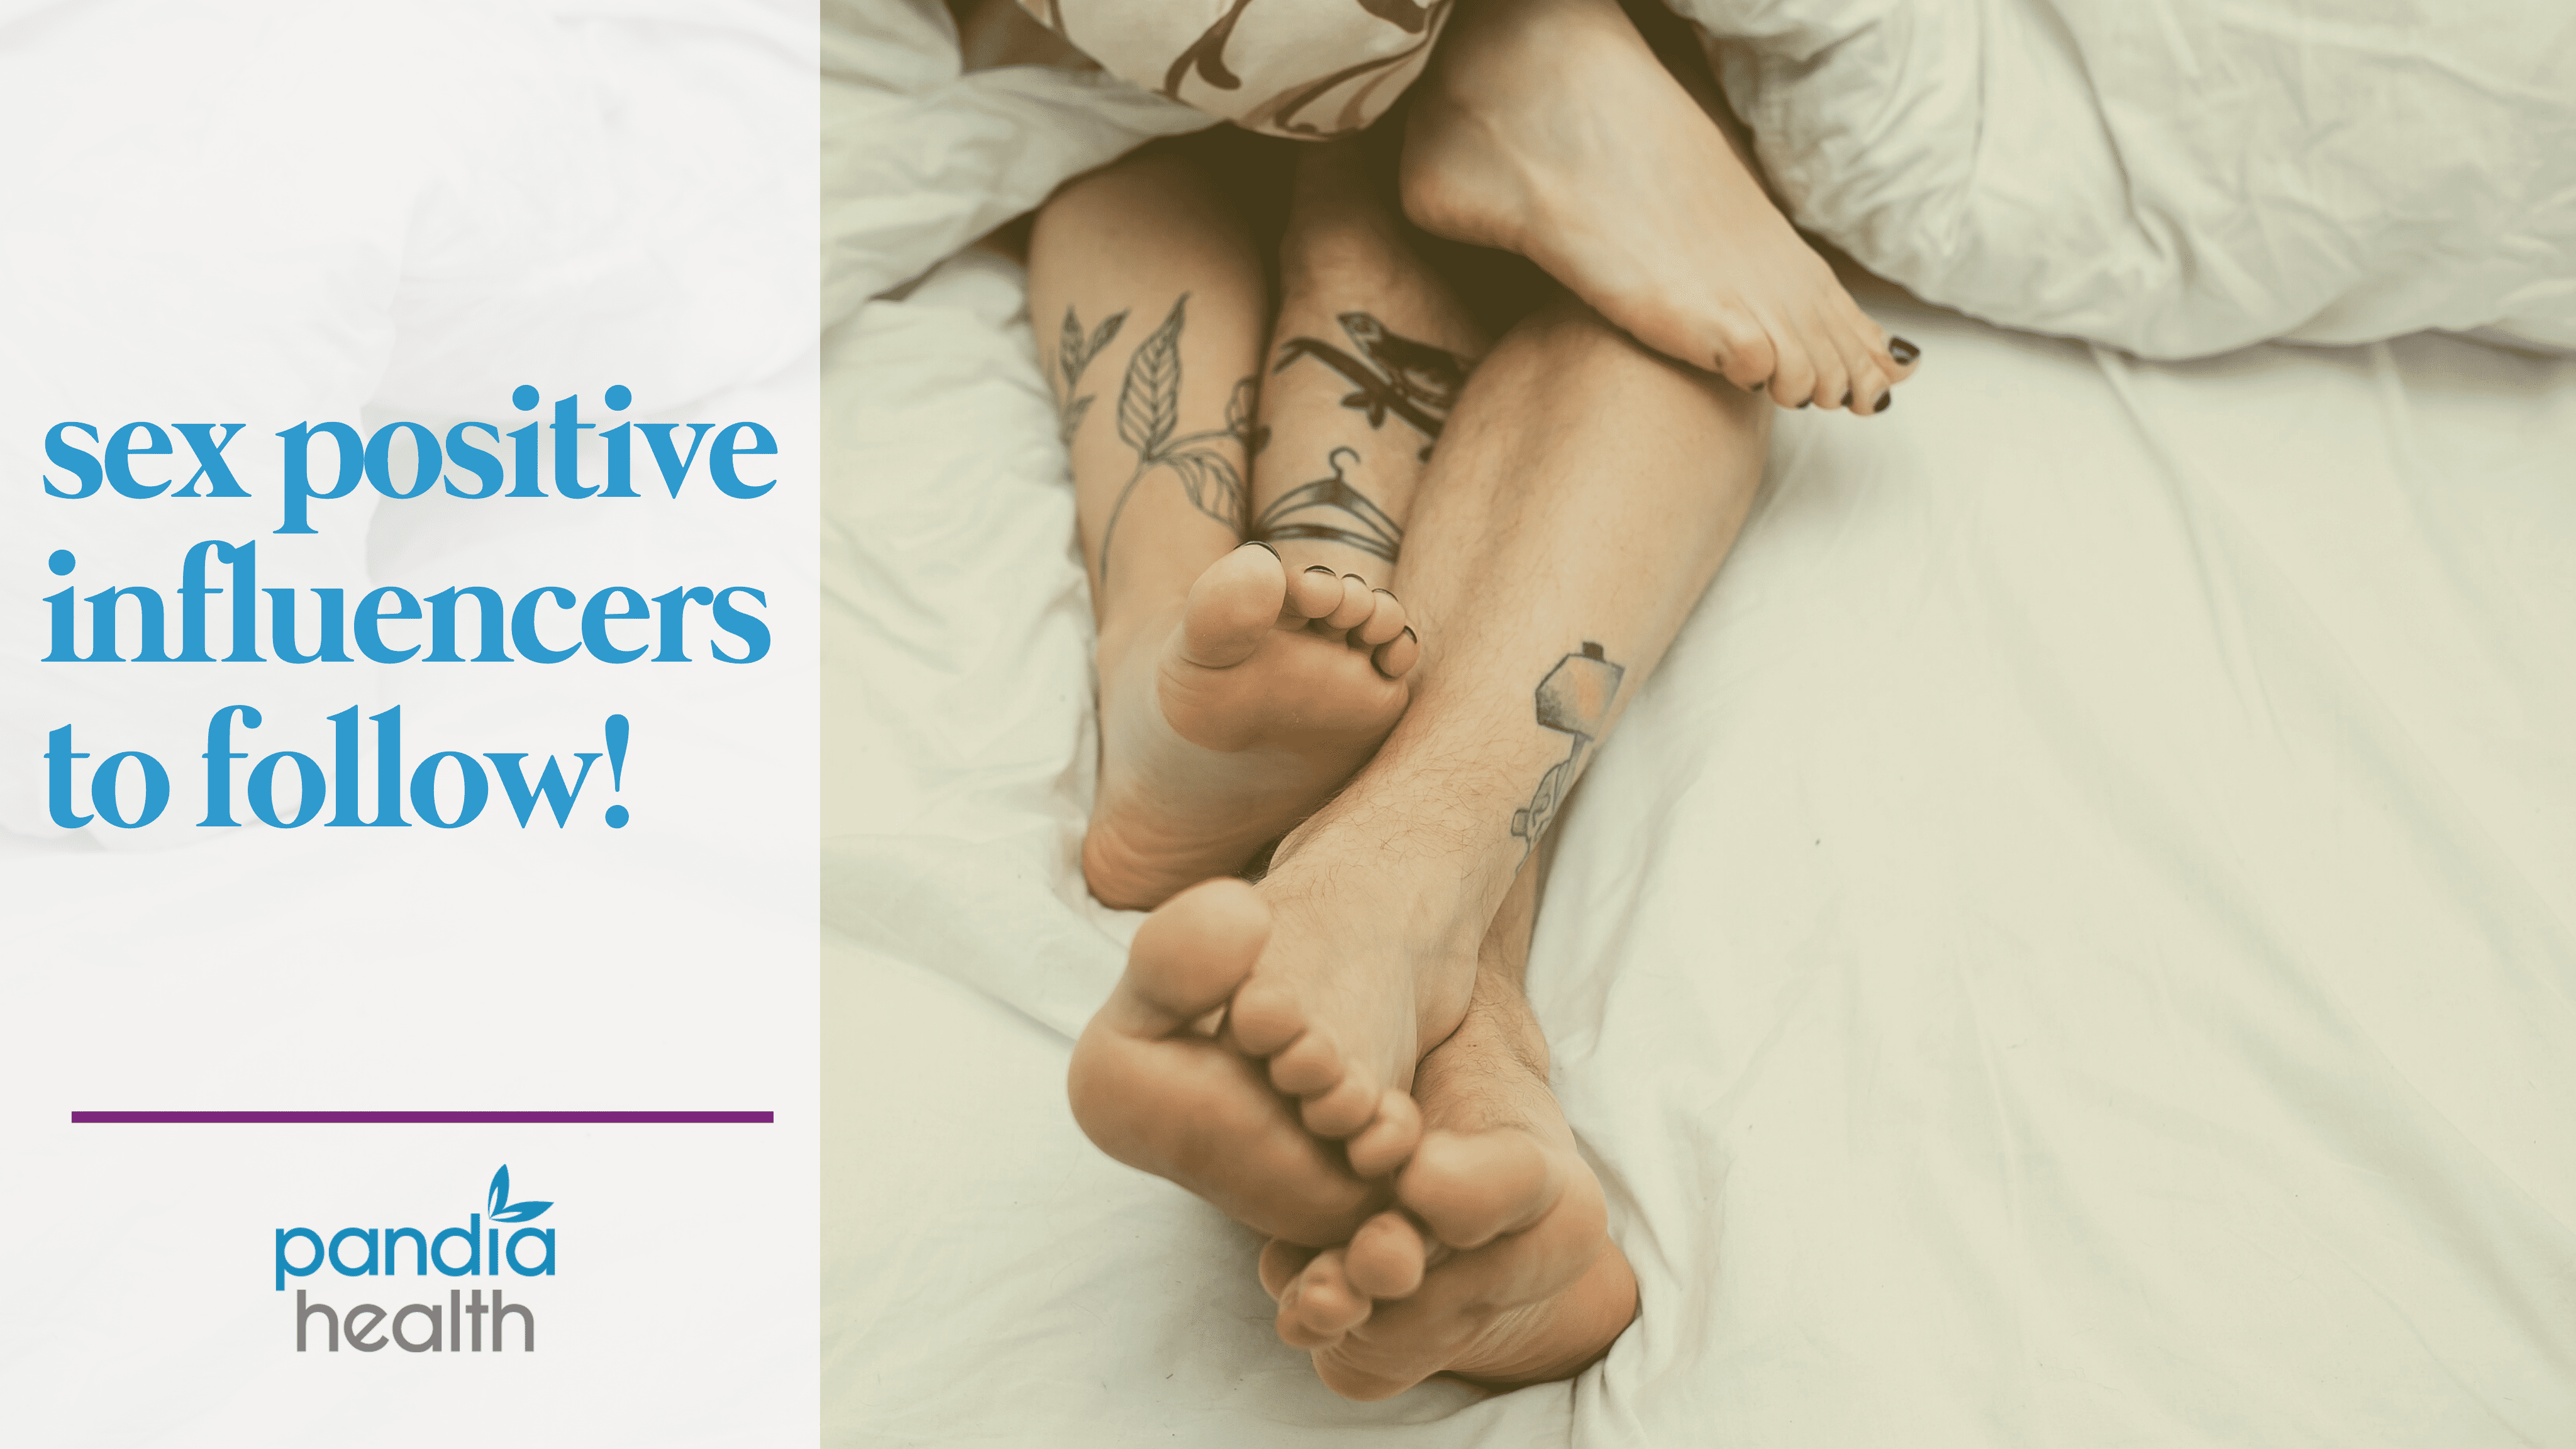 Header image for "Sex Positive Influencers to Follow" - Couple in a bed together